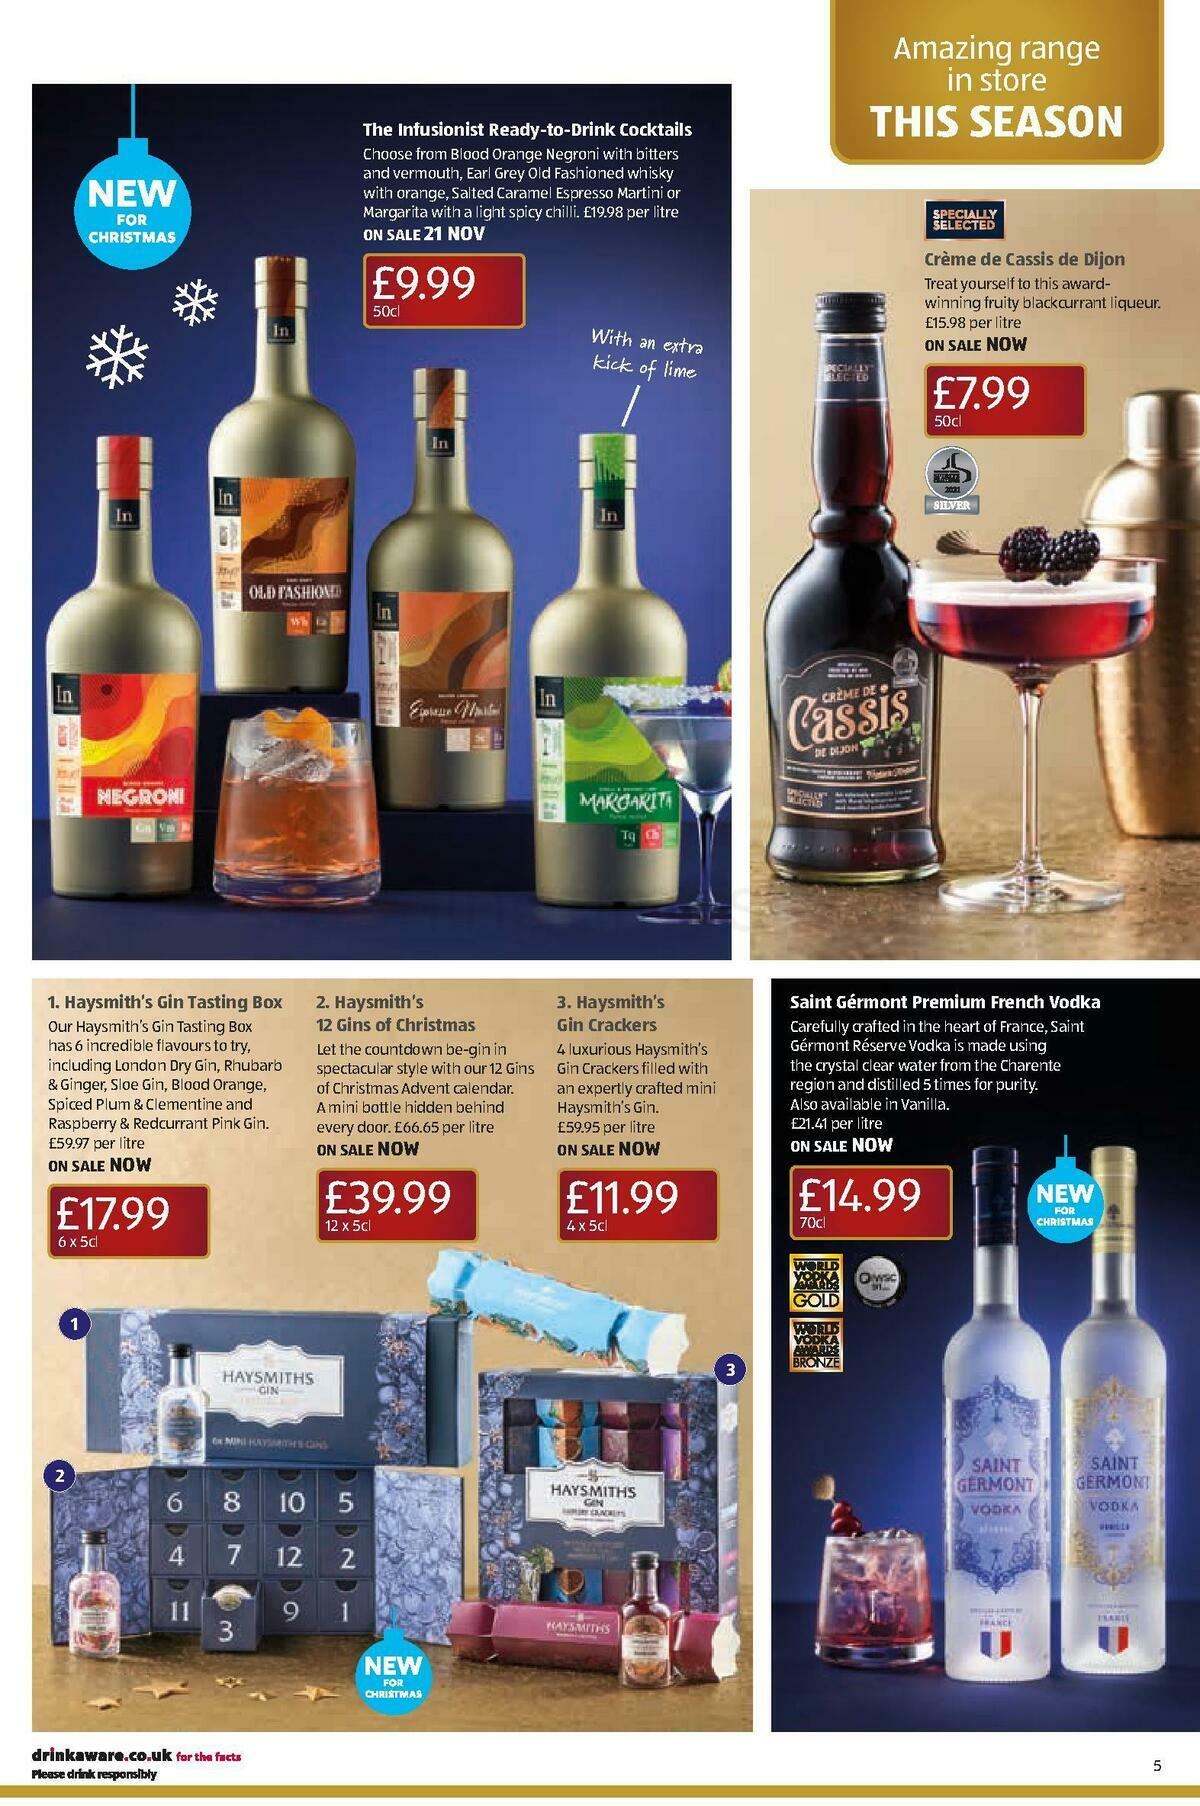 ALDI Offers from 4 December